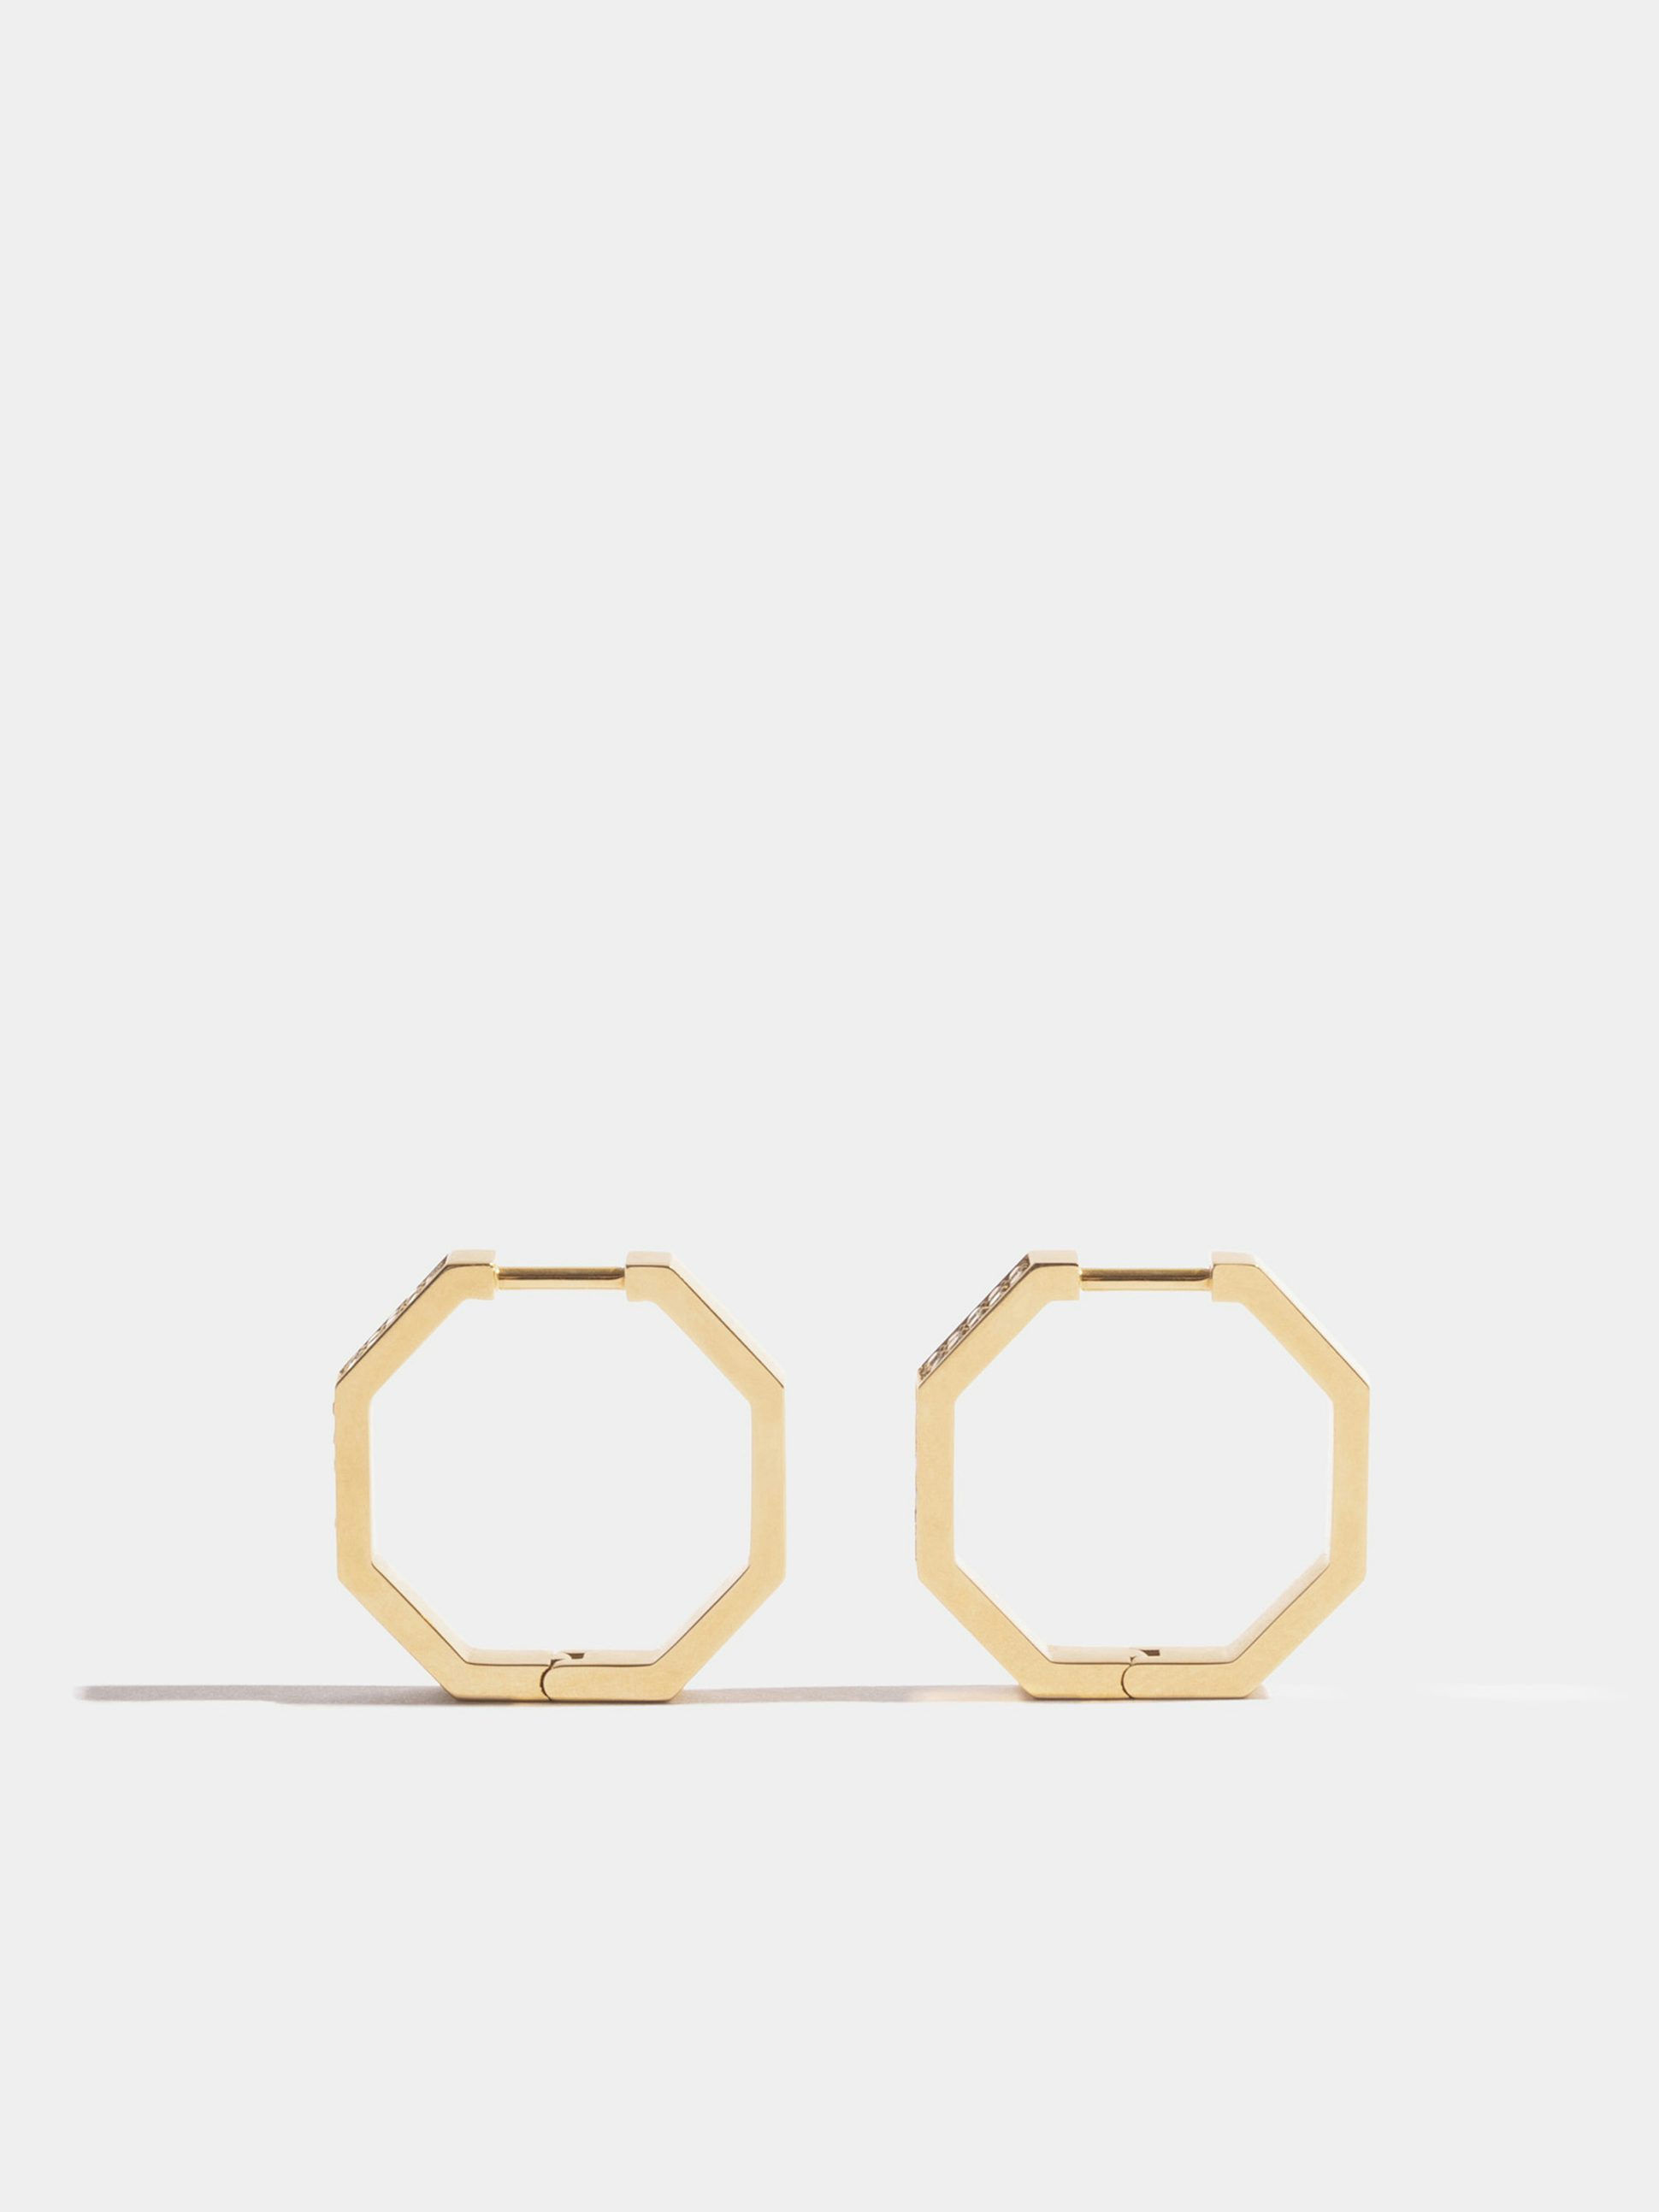 Octogone 18mm earrings in 18k Fairmined ethical yellow gold, paved with lab-grown diamonds, the pair.